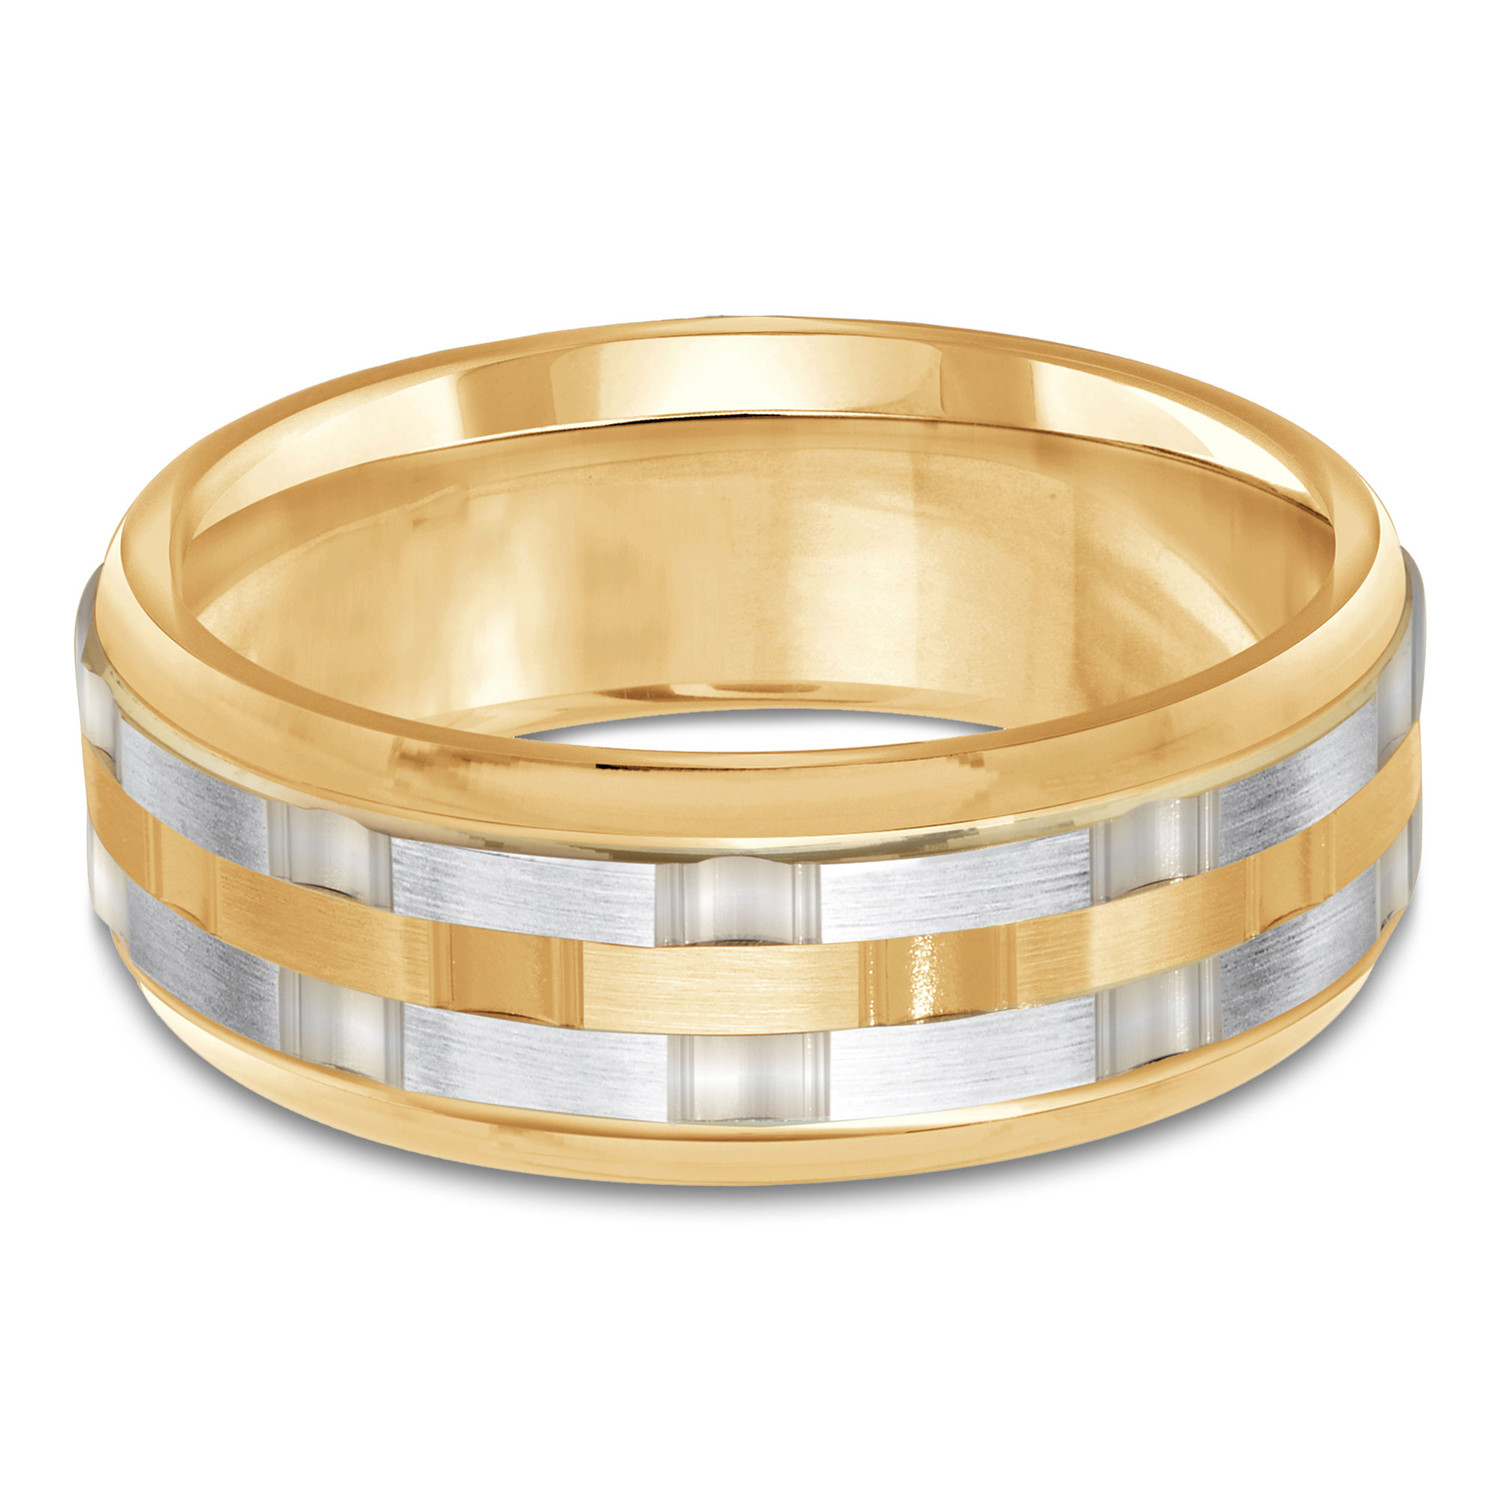 8 MM Alternative Mens Wedding Band in 14K Two-tone Yellow & White Gold (MDVB1054)